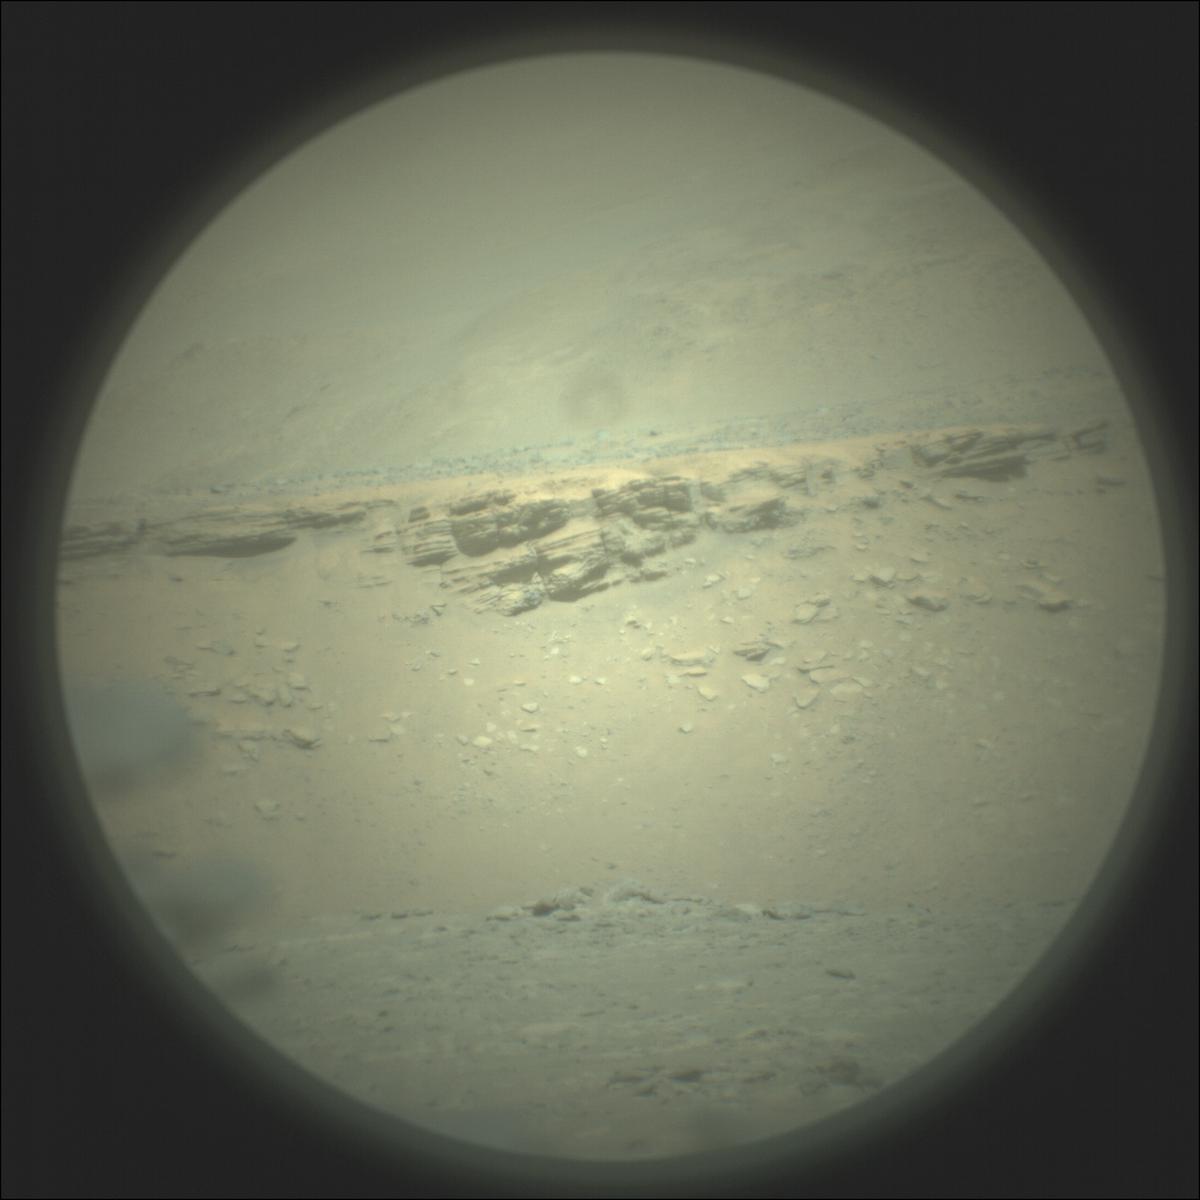 NASA's Mars Perseverance rover acquired this image using the SuperCam Remote Micro-Imager, located at the top of the rover's mast.